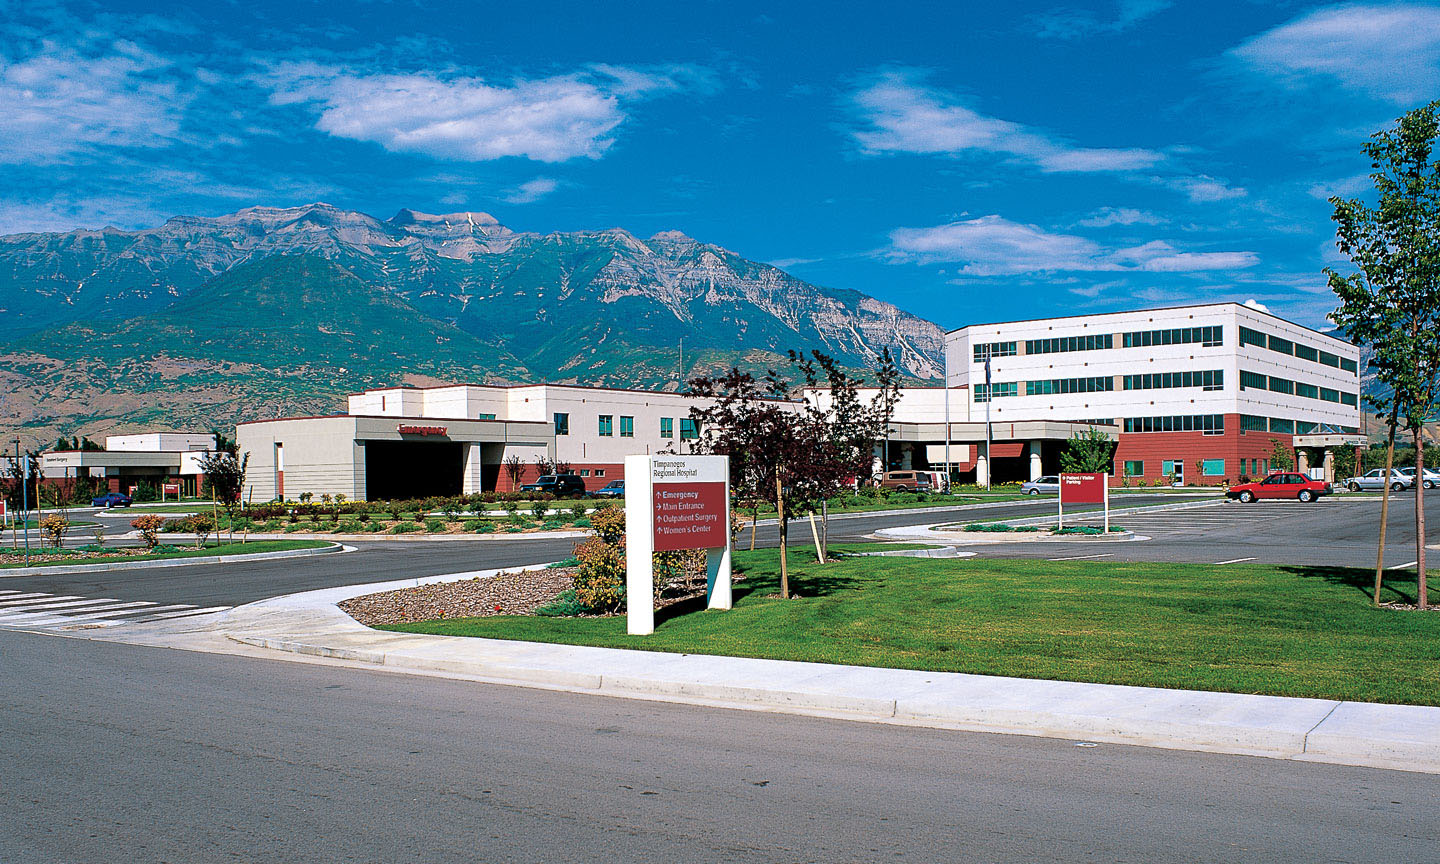 Timpanogos commercial real estate developers